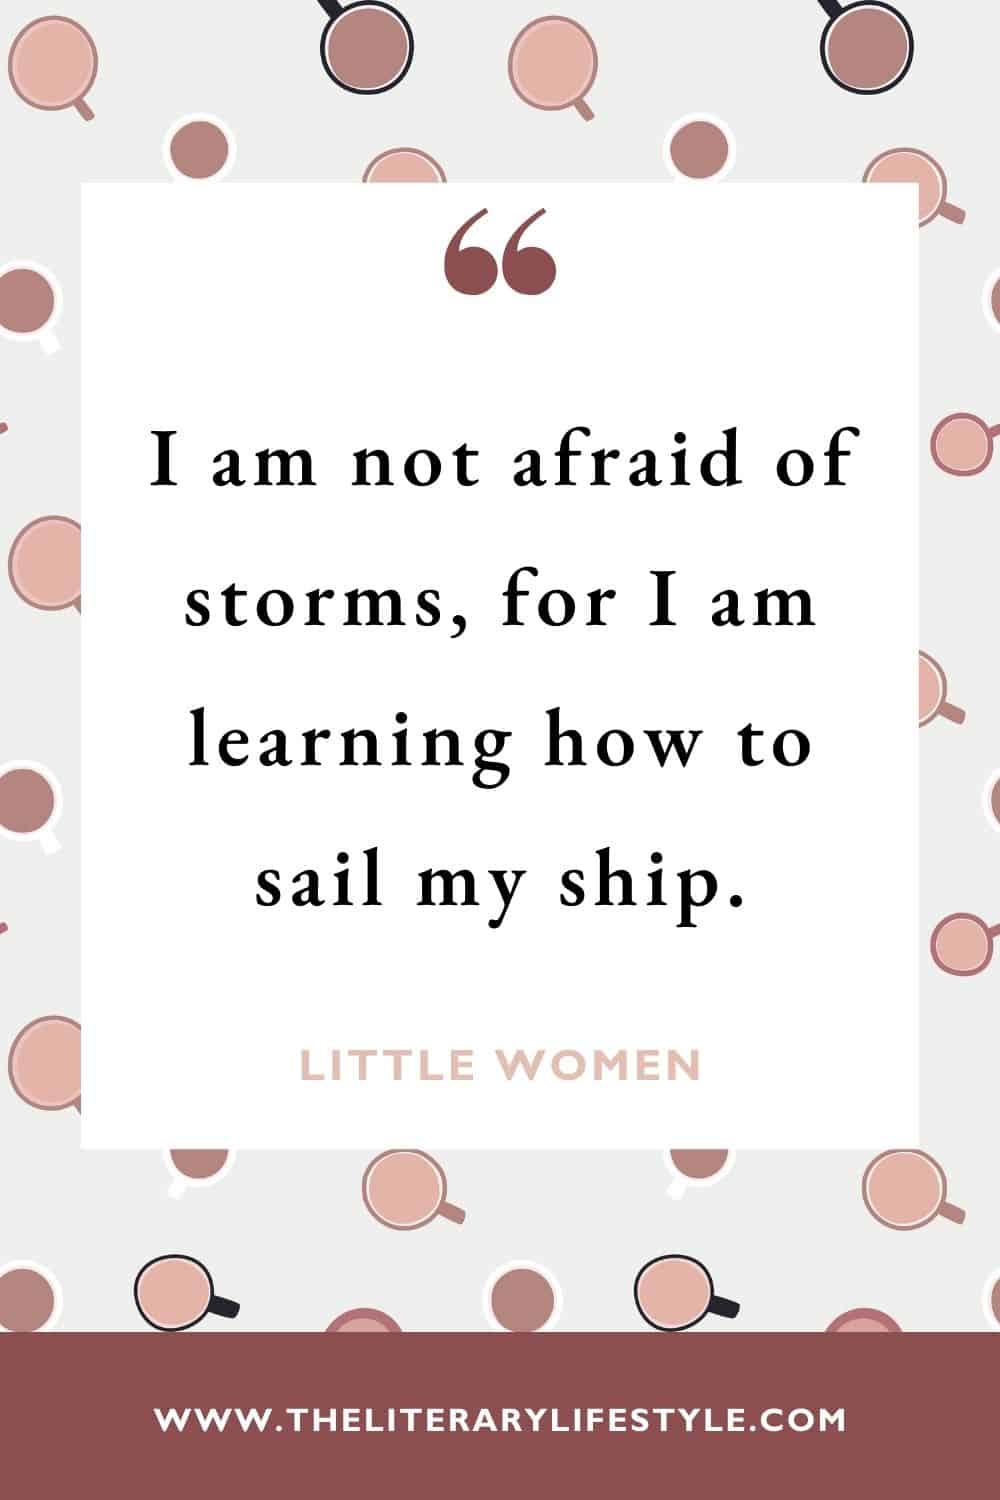 i am not agraid of storms, for i am learning how to sail my ship